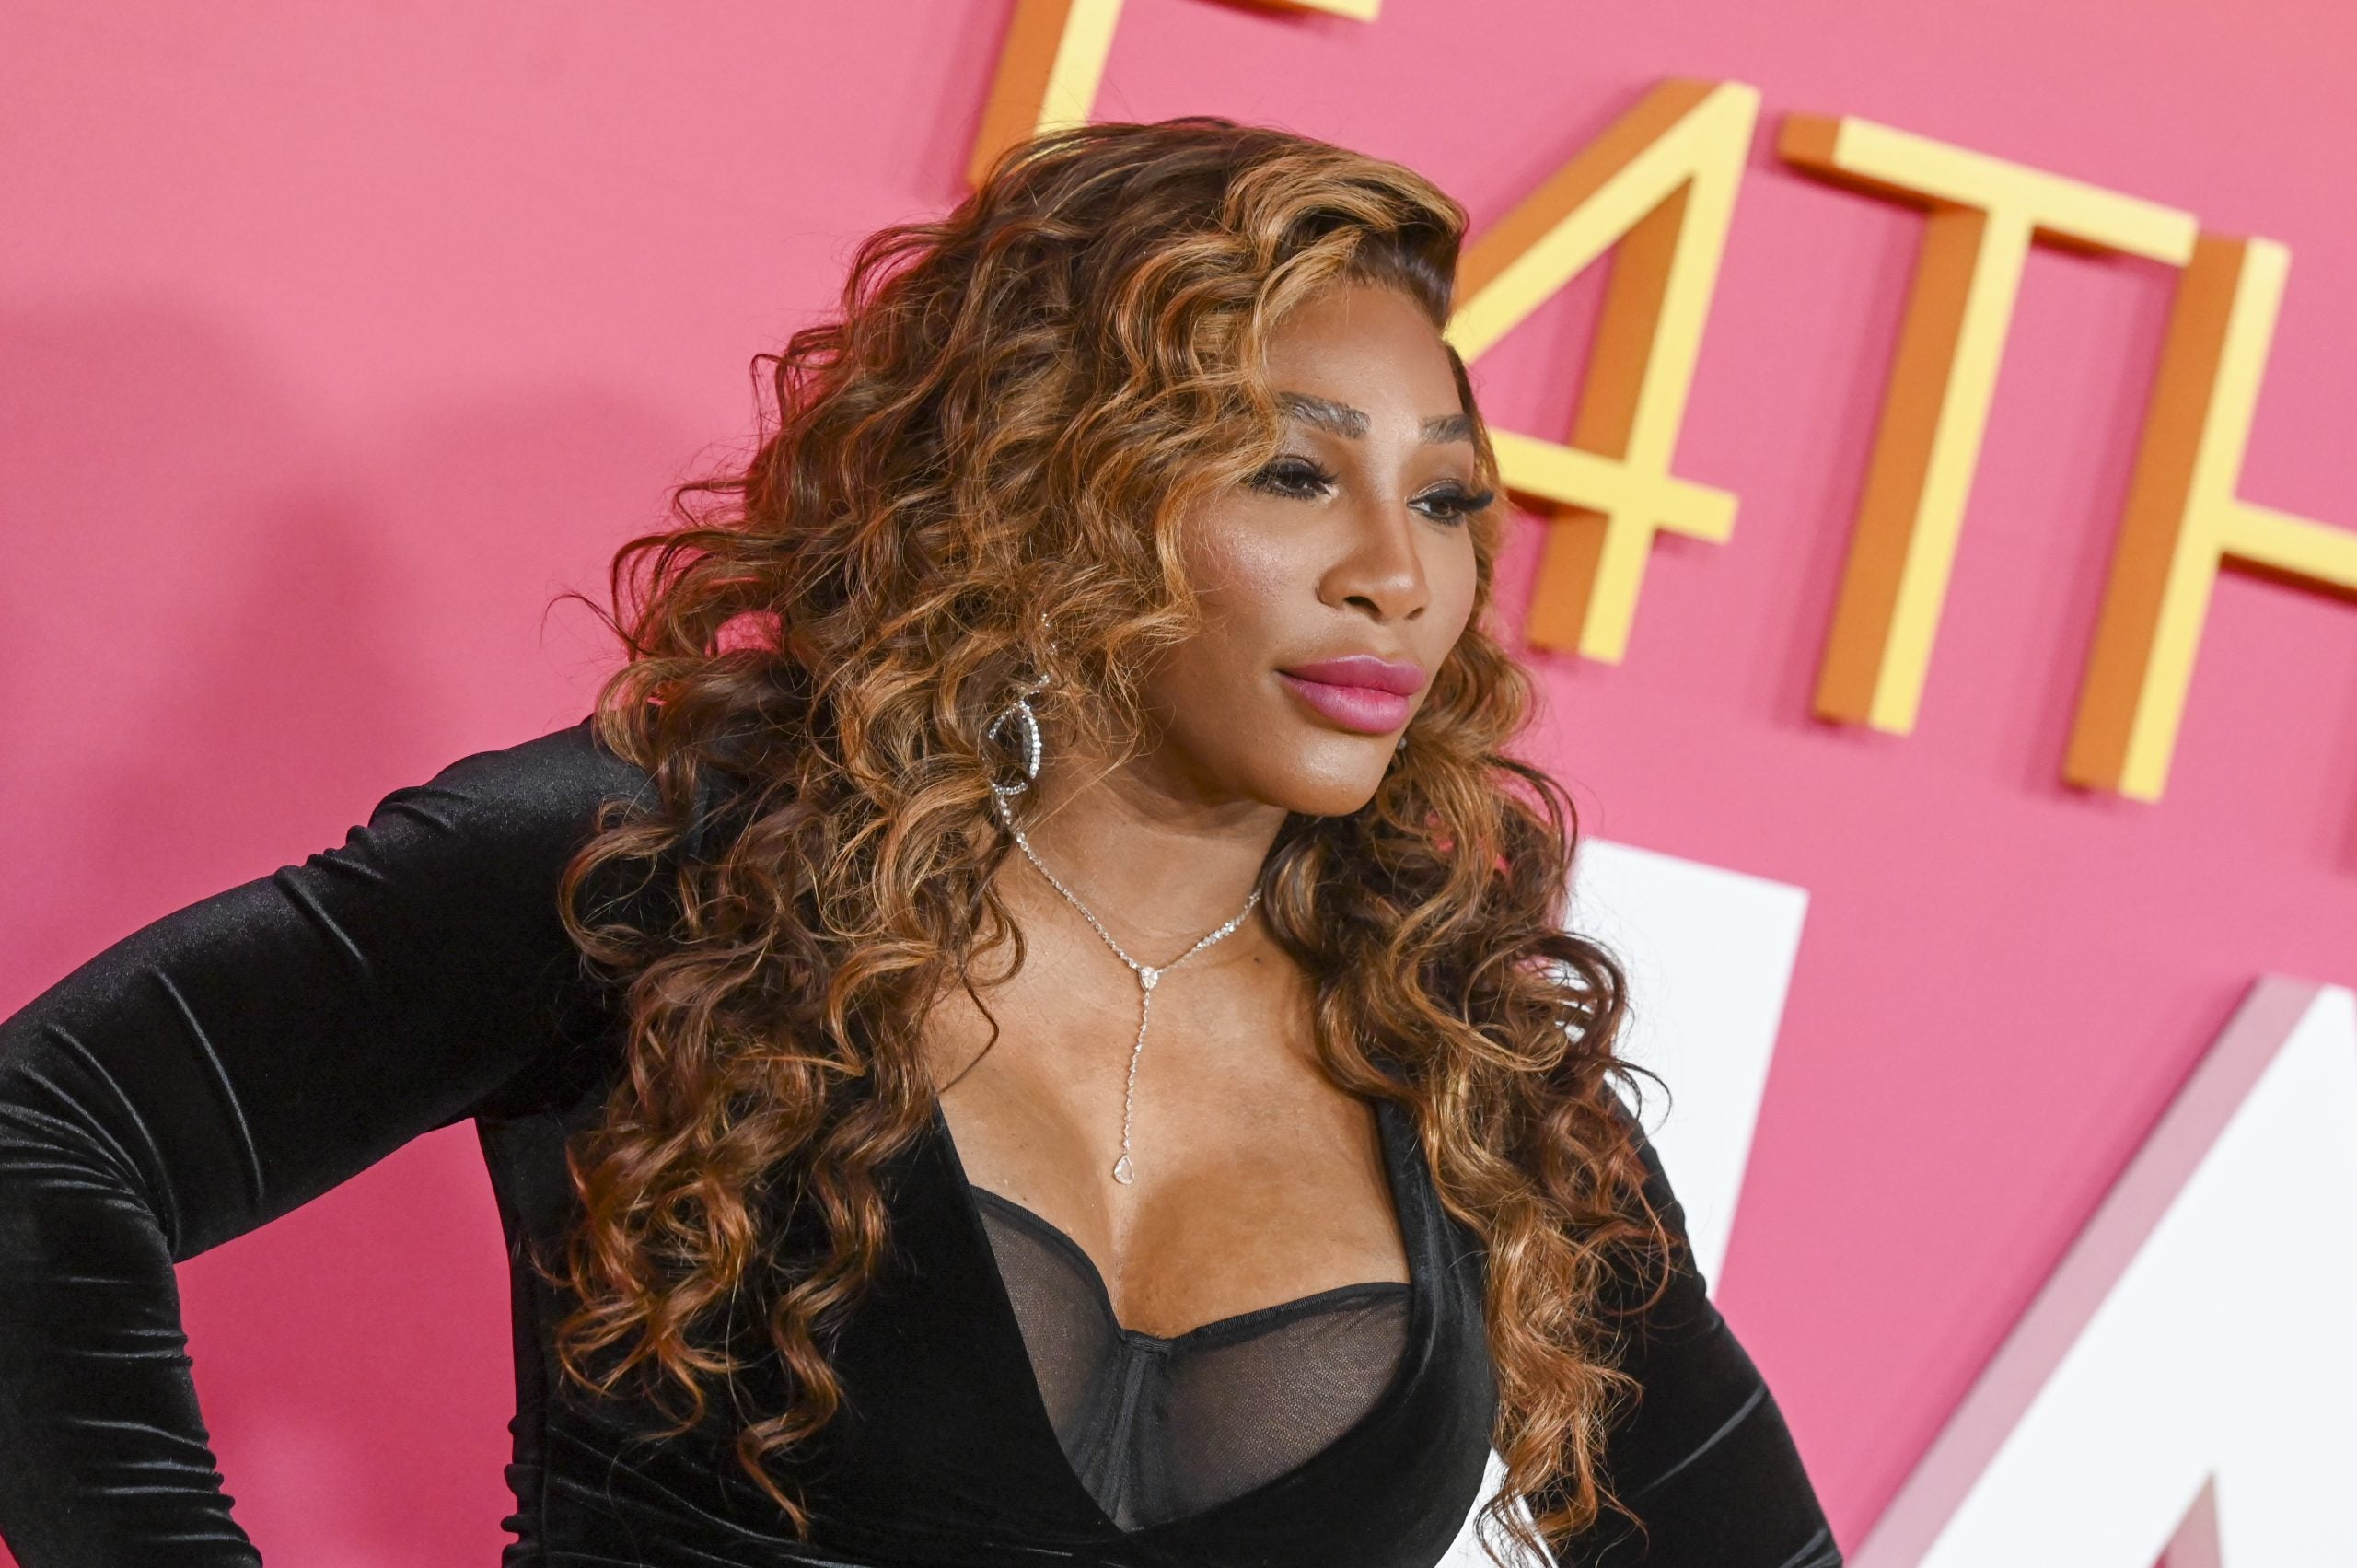 Serena Williams Launches Production Company That Will Amplify Women's Stories